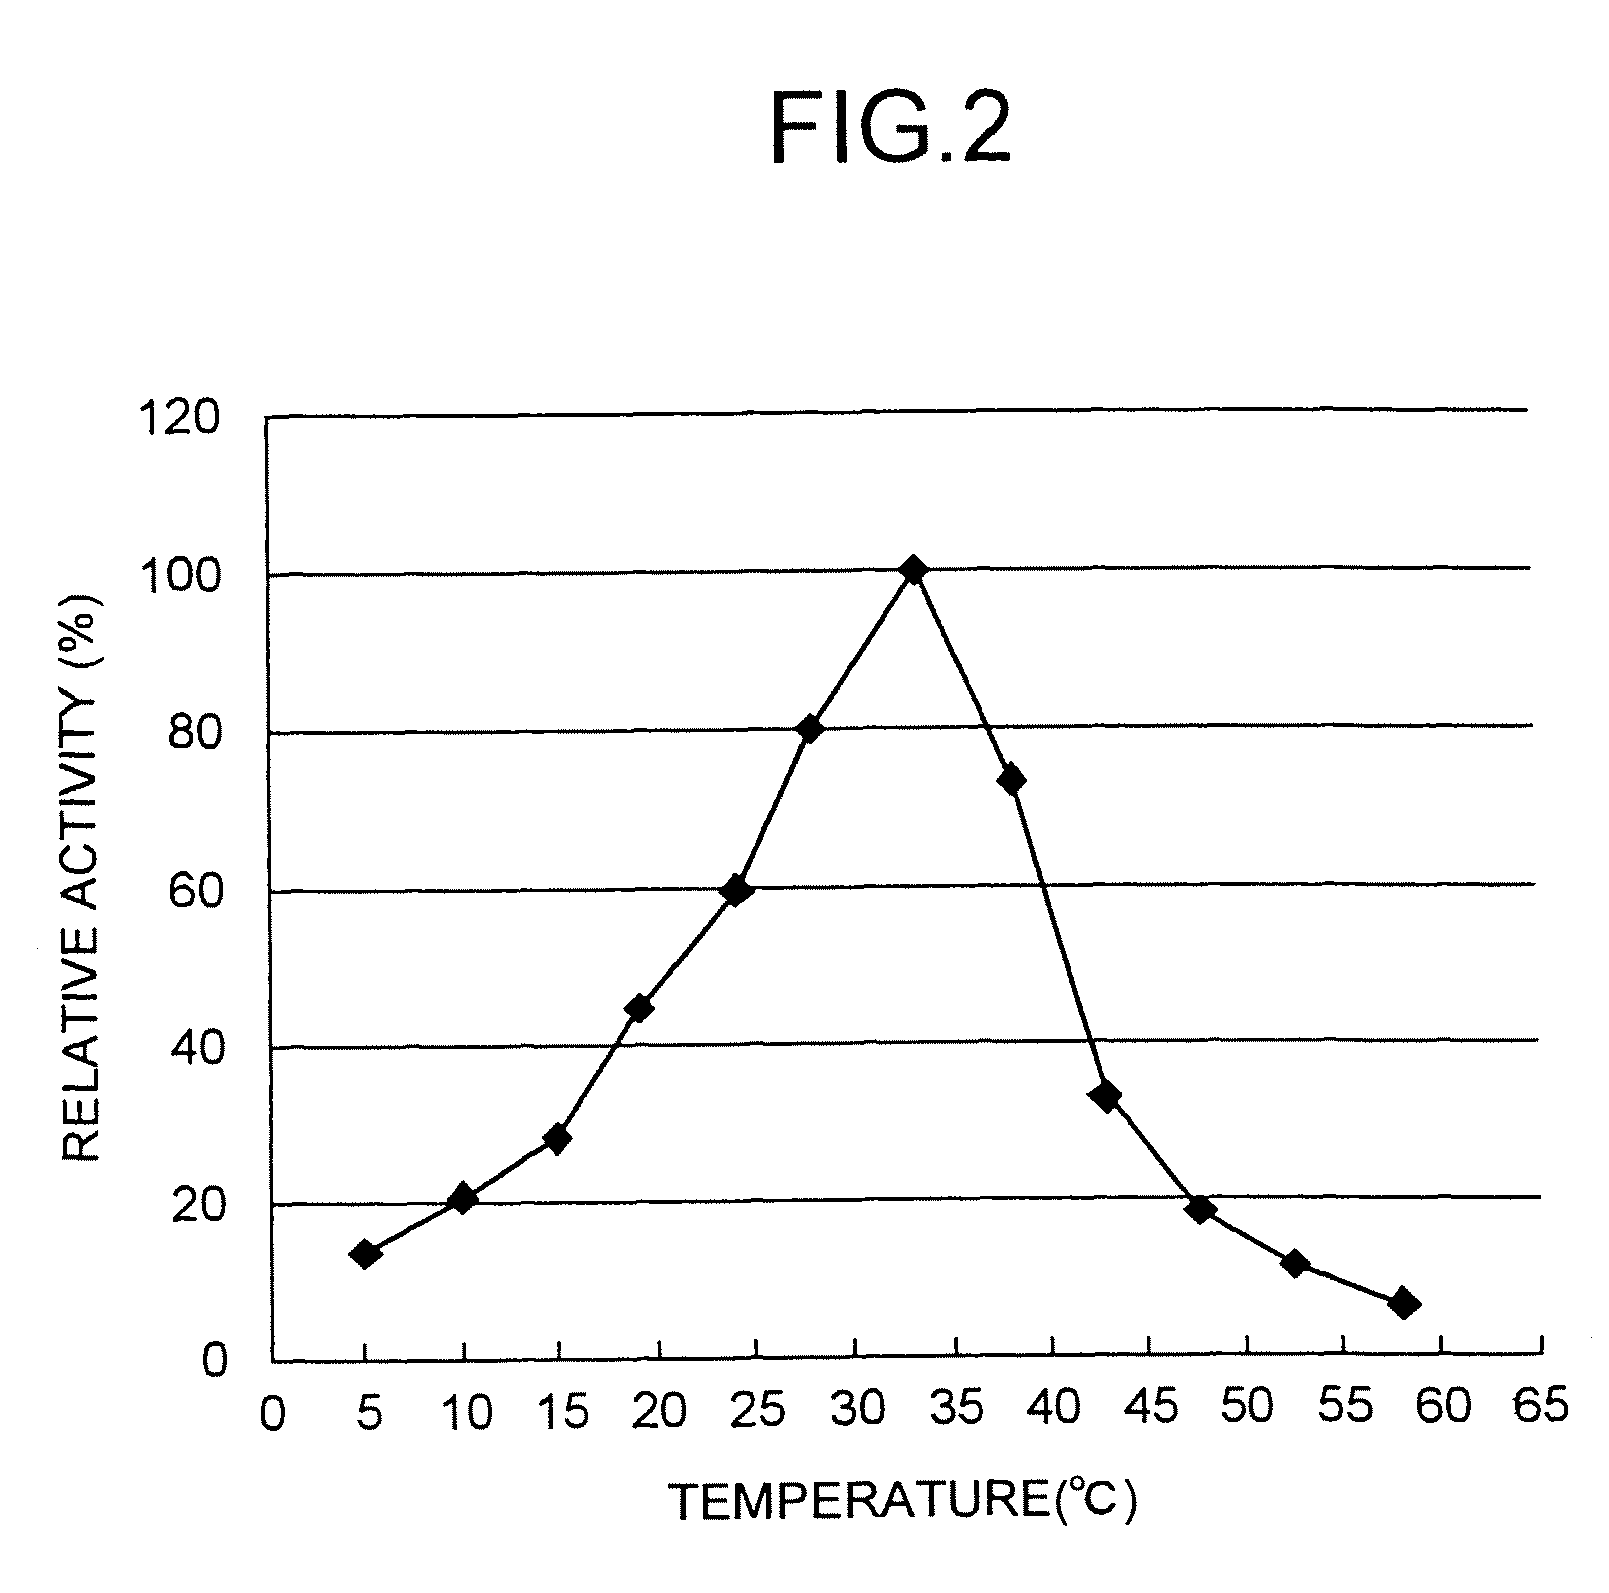 Method for producing tripeptides and/or peptides longer than tripeptides